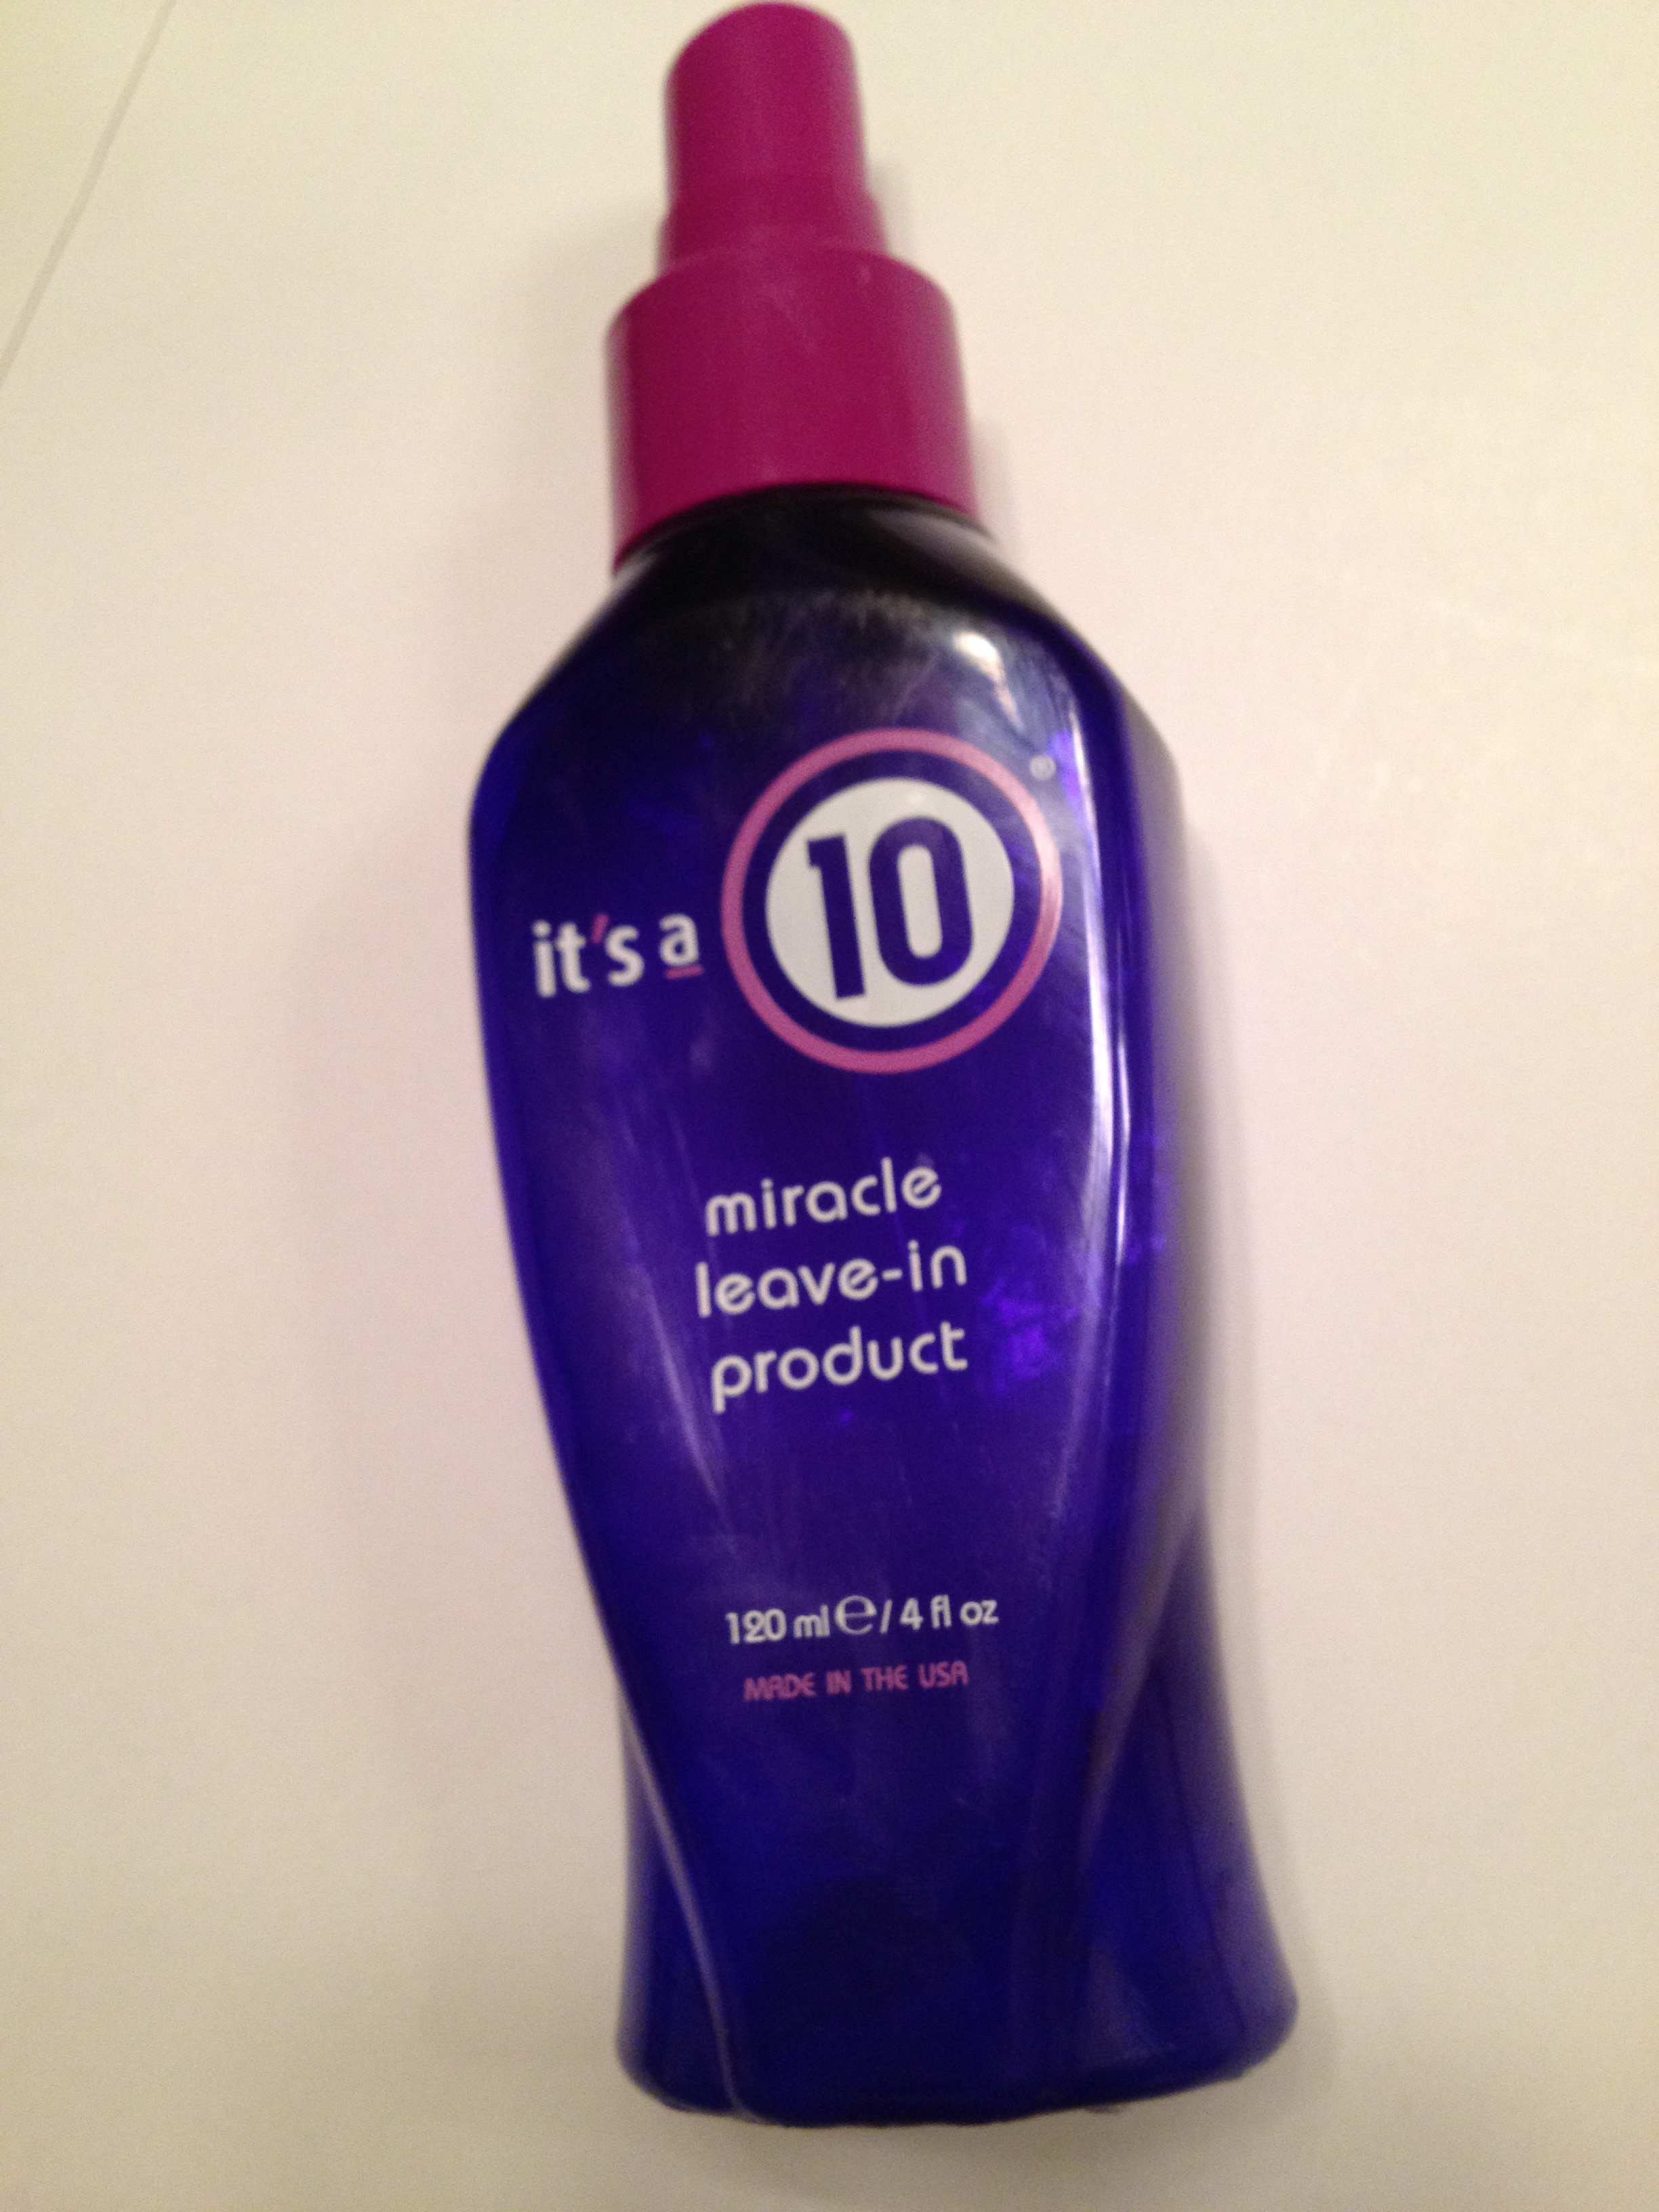 It's a 10 miracle leave-in product review